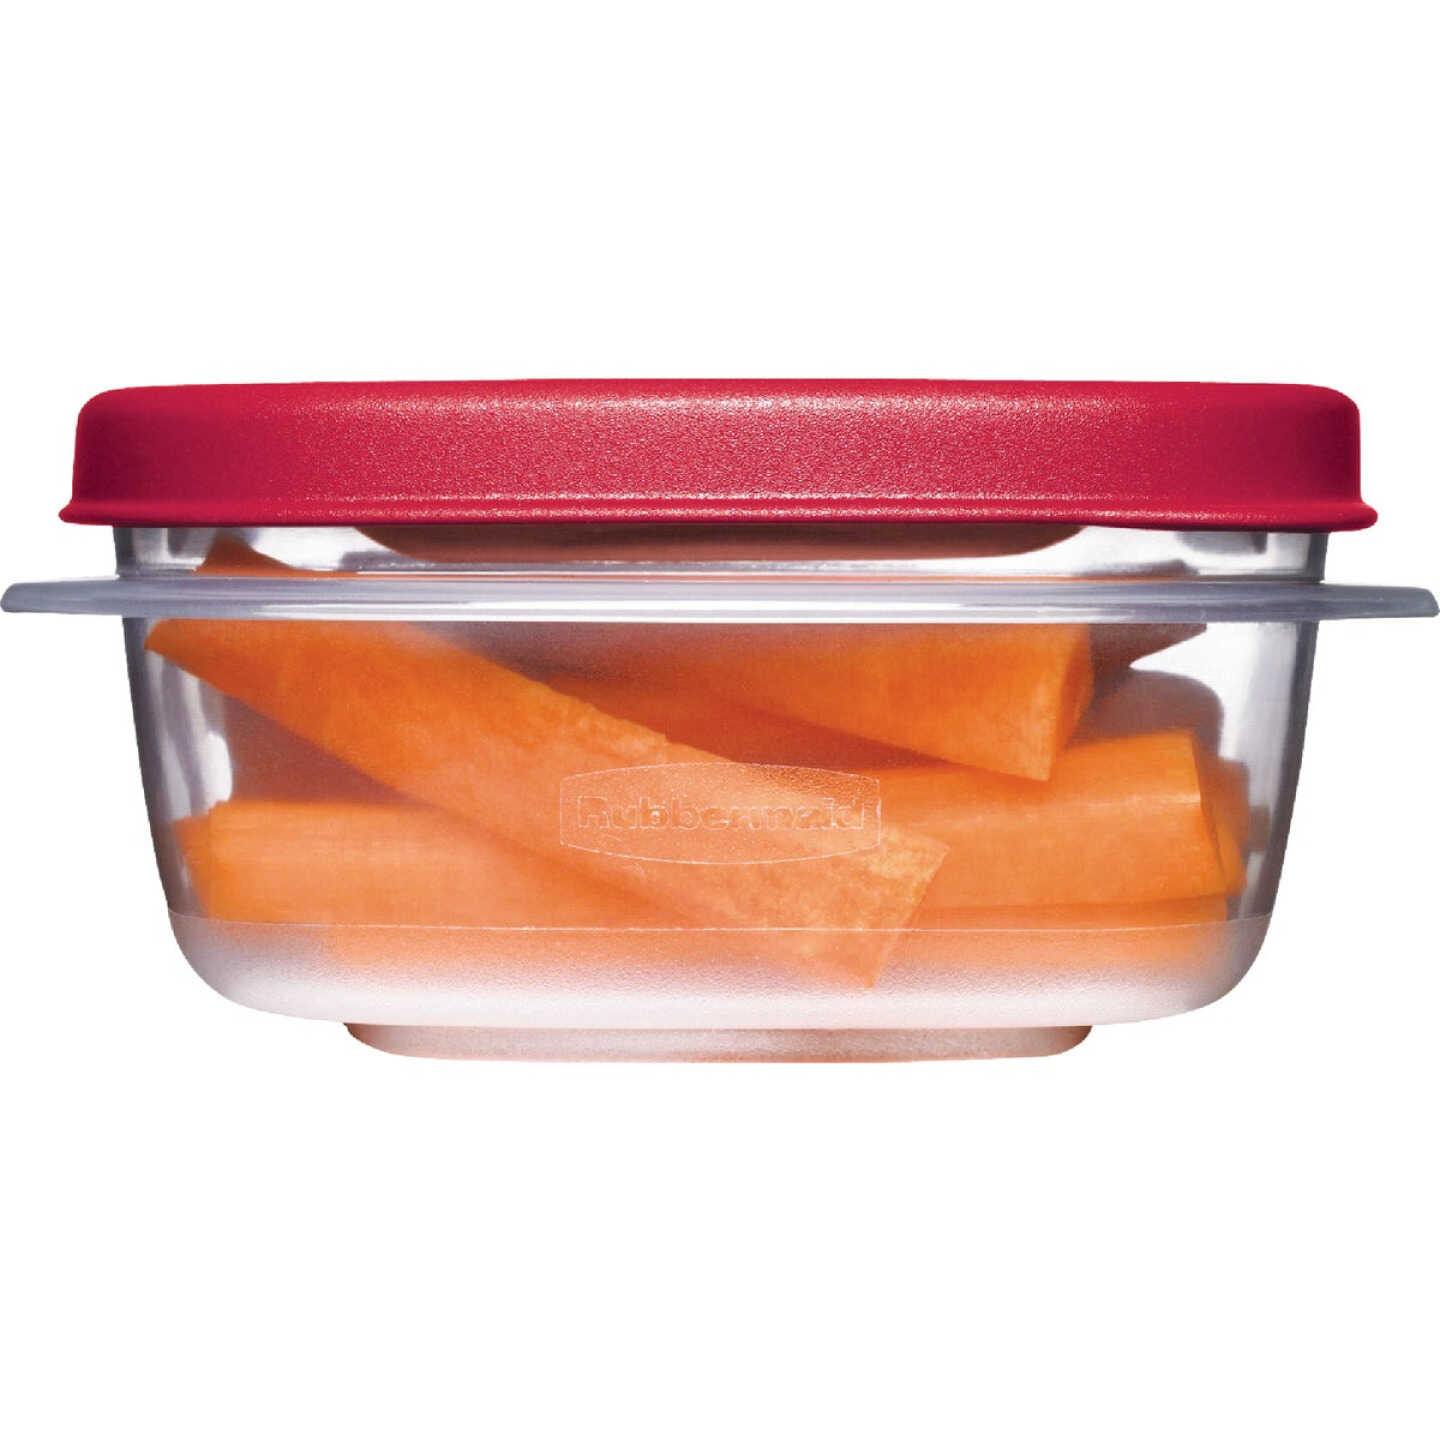 Ziploc Twist 'n Loc 1 Qt. Clear Round Food Storage Container with Lids  (2-Pack)